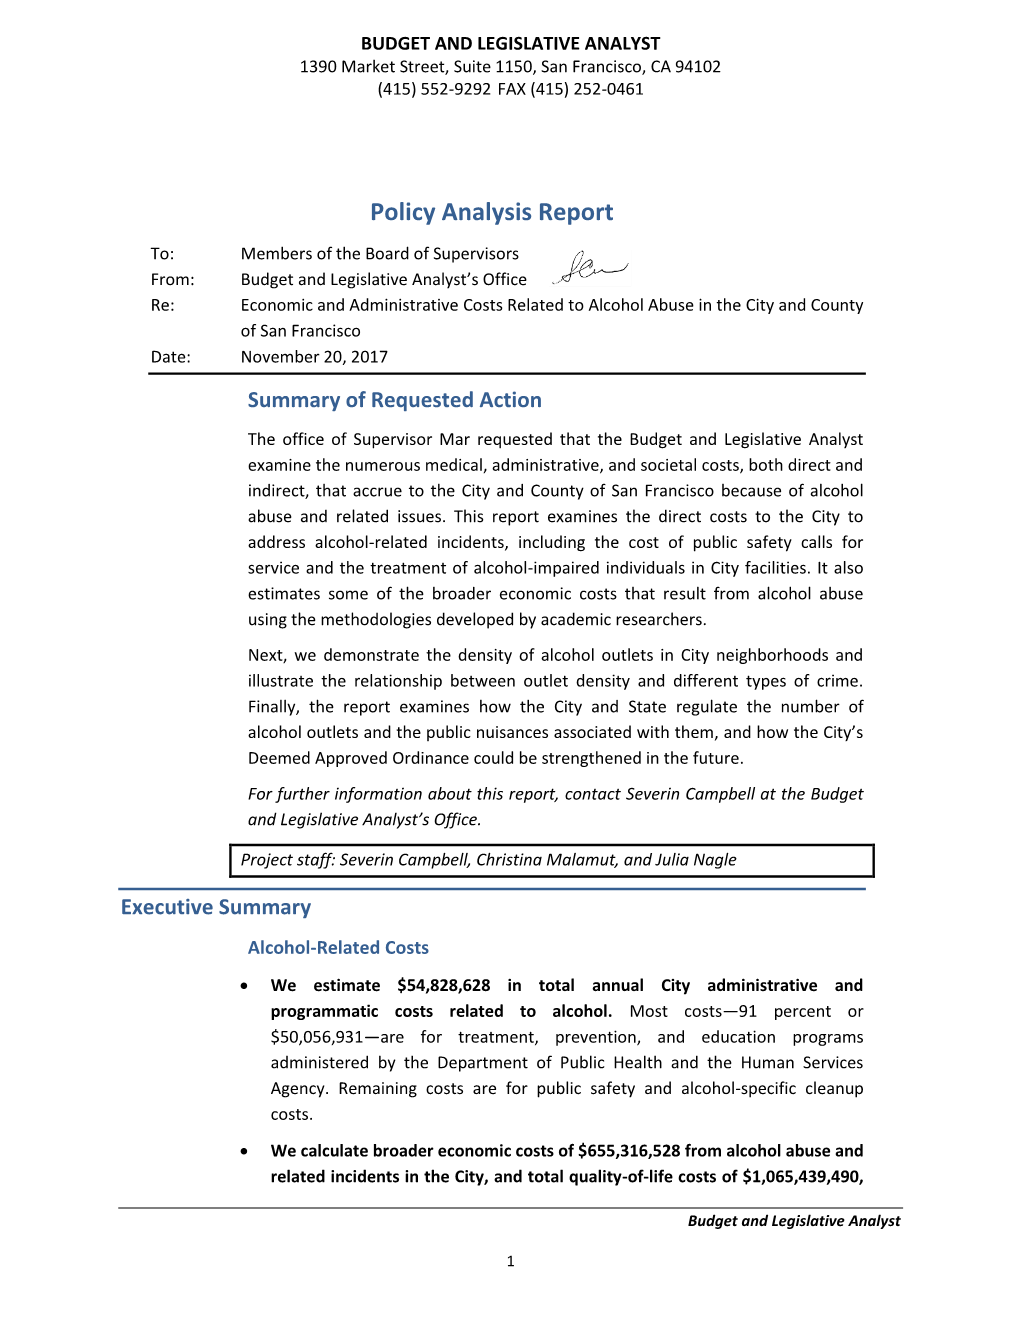 Policy Analysis Report